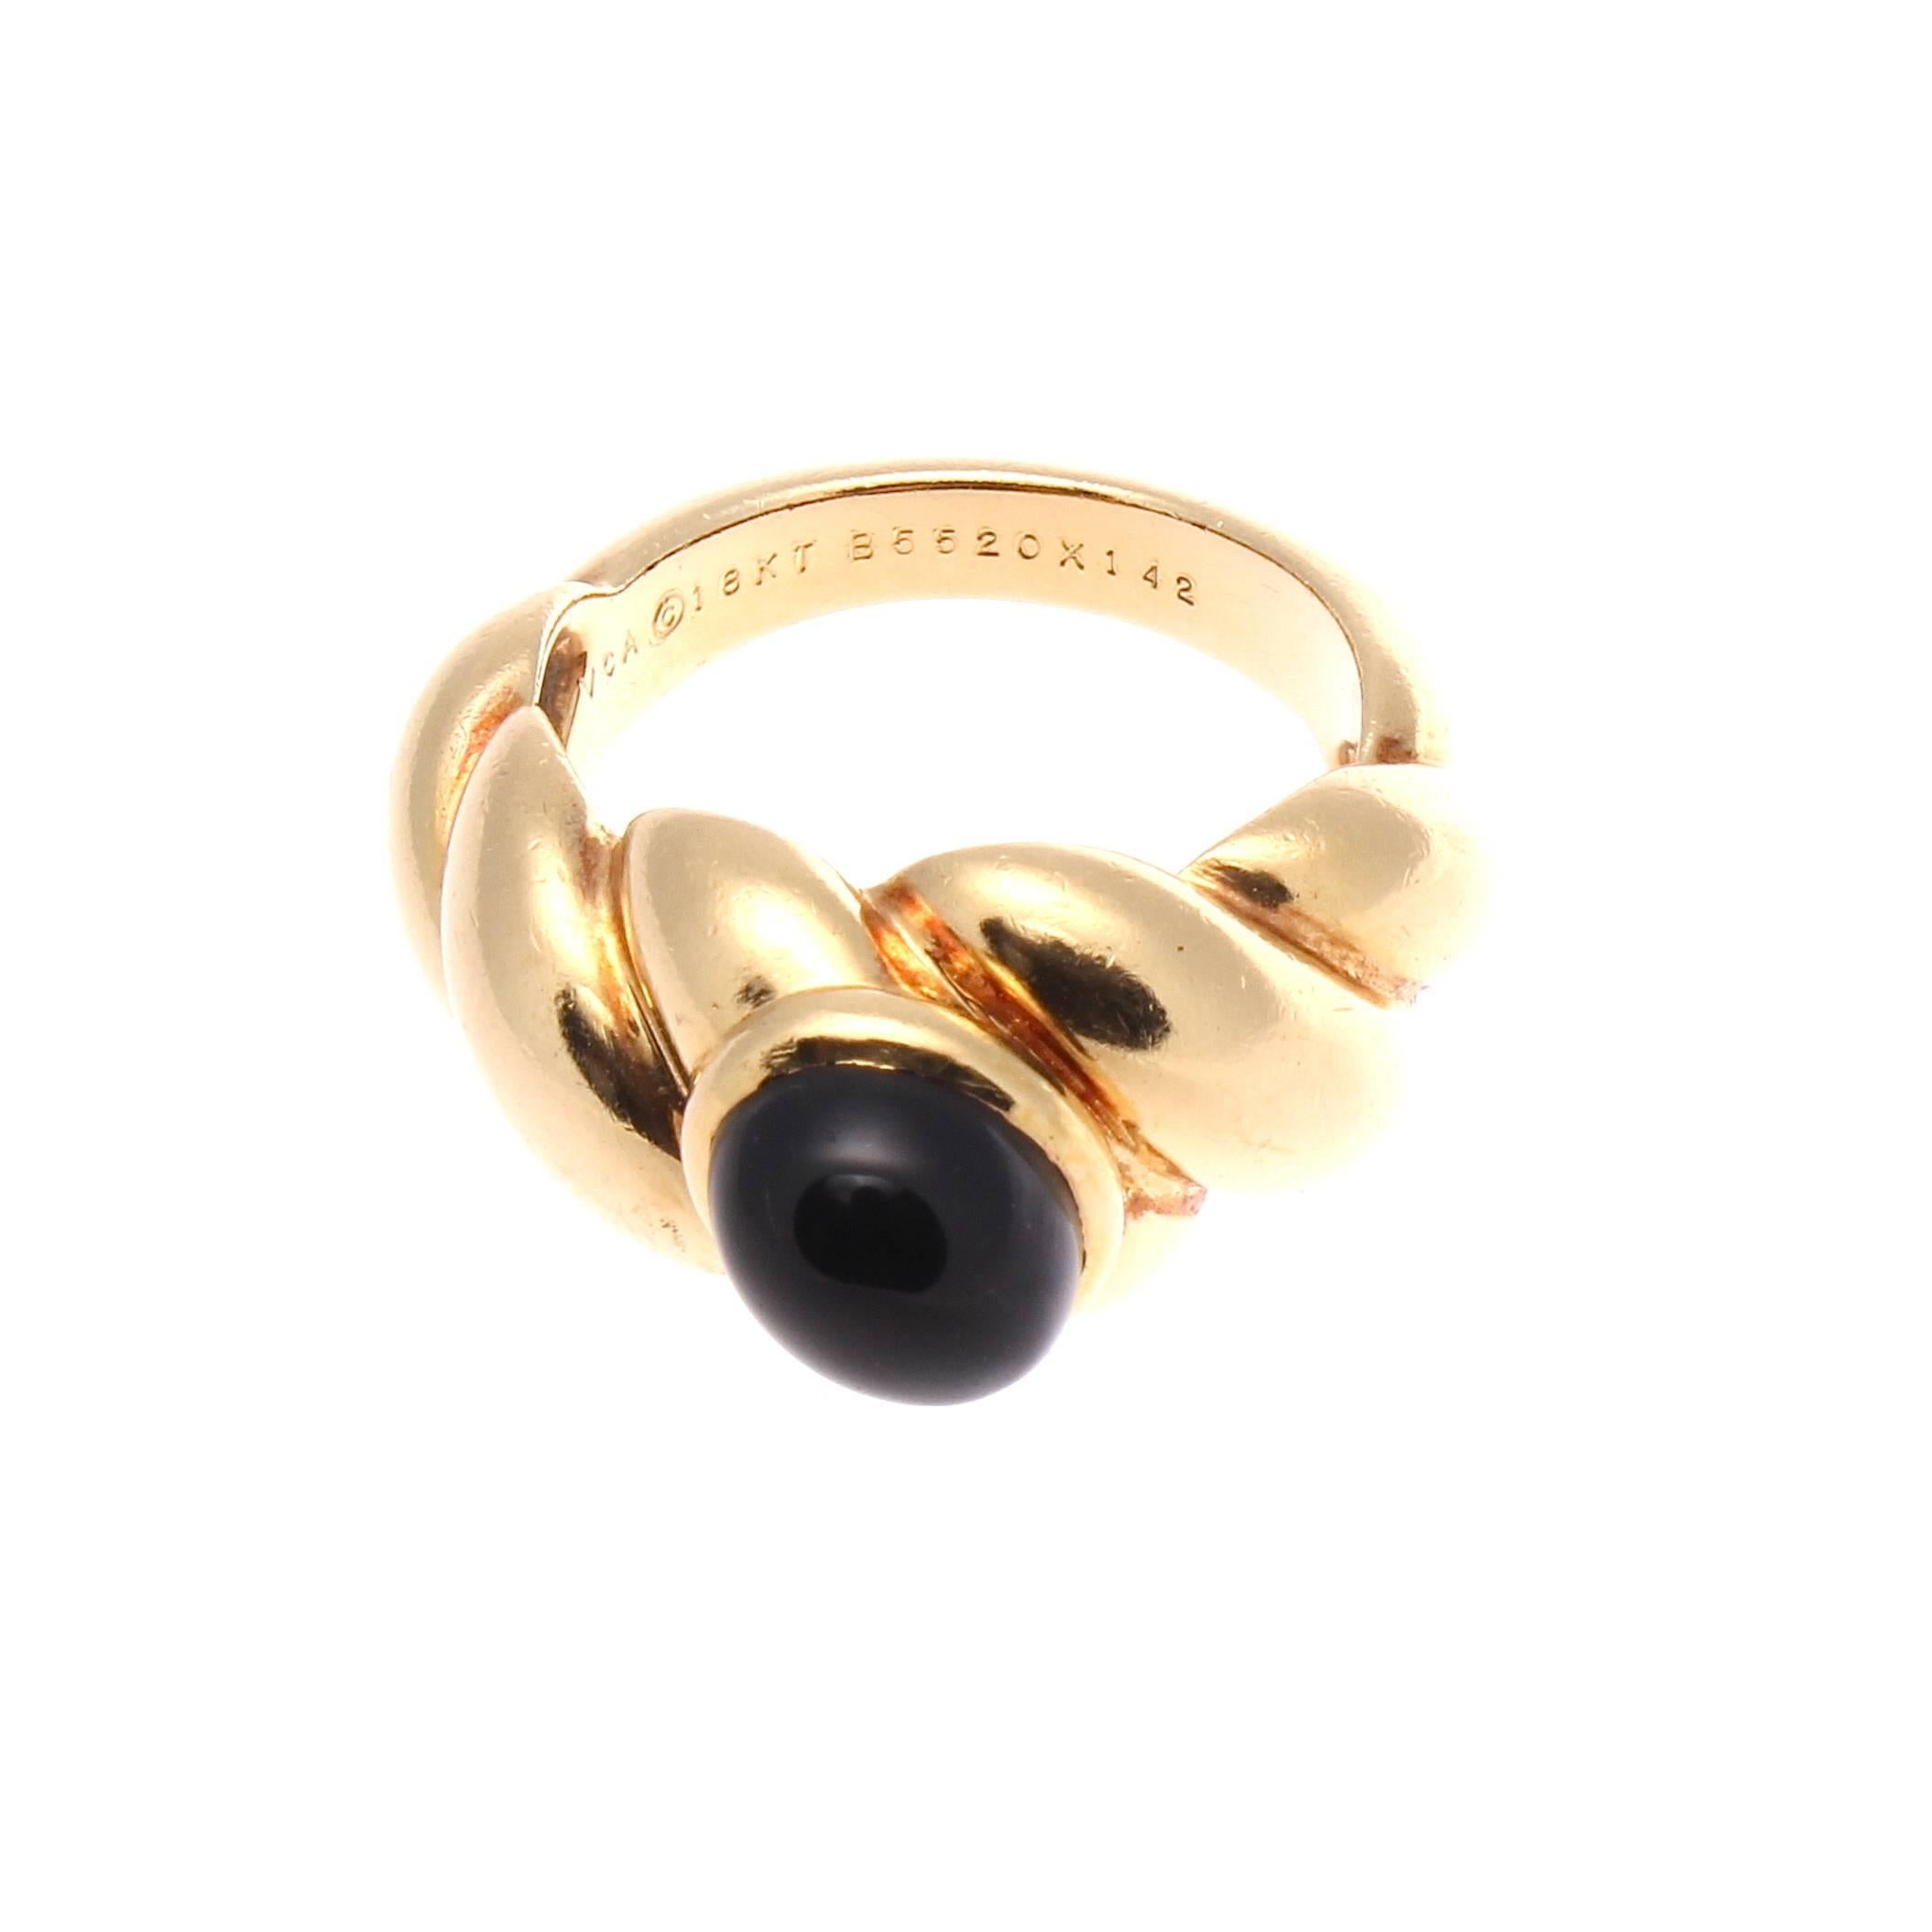 Van Cleef & Arpels, a long rich history of trend setting fashion that is still relevant today. The ring has been designed with a jet black cabochon onyx that is bezel set in gentle rolling hills of 18k yellow gold. Singed VCA and numbered.

Ring